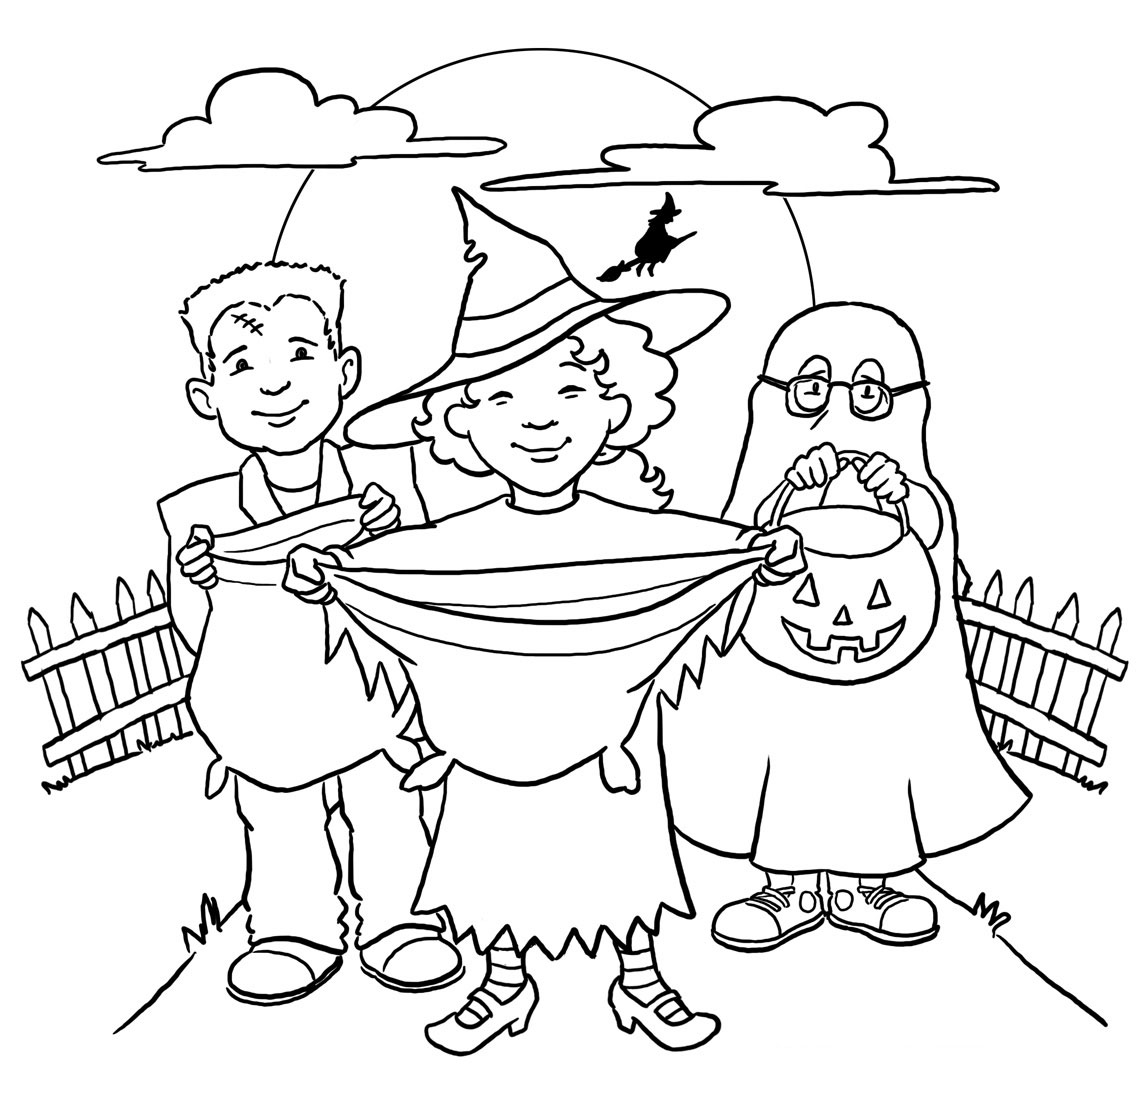  Trick or Treat Bag KIDS Halloween Coloring Pages